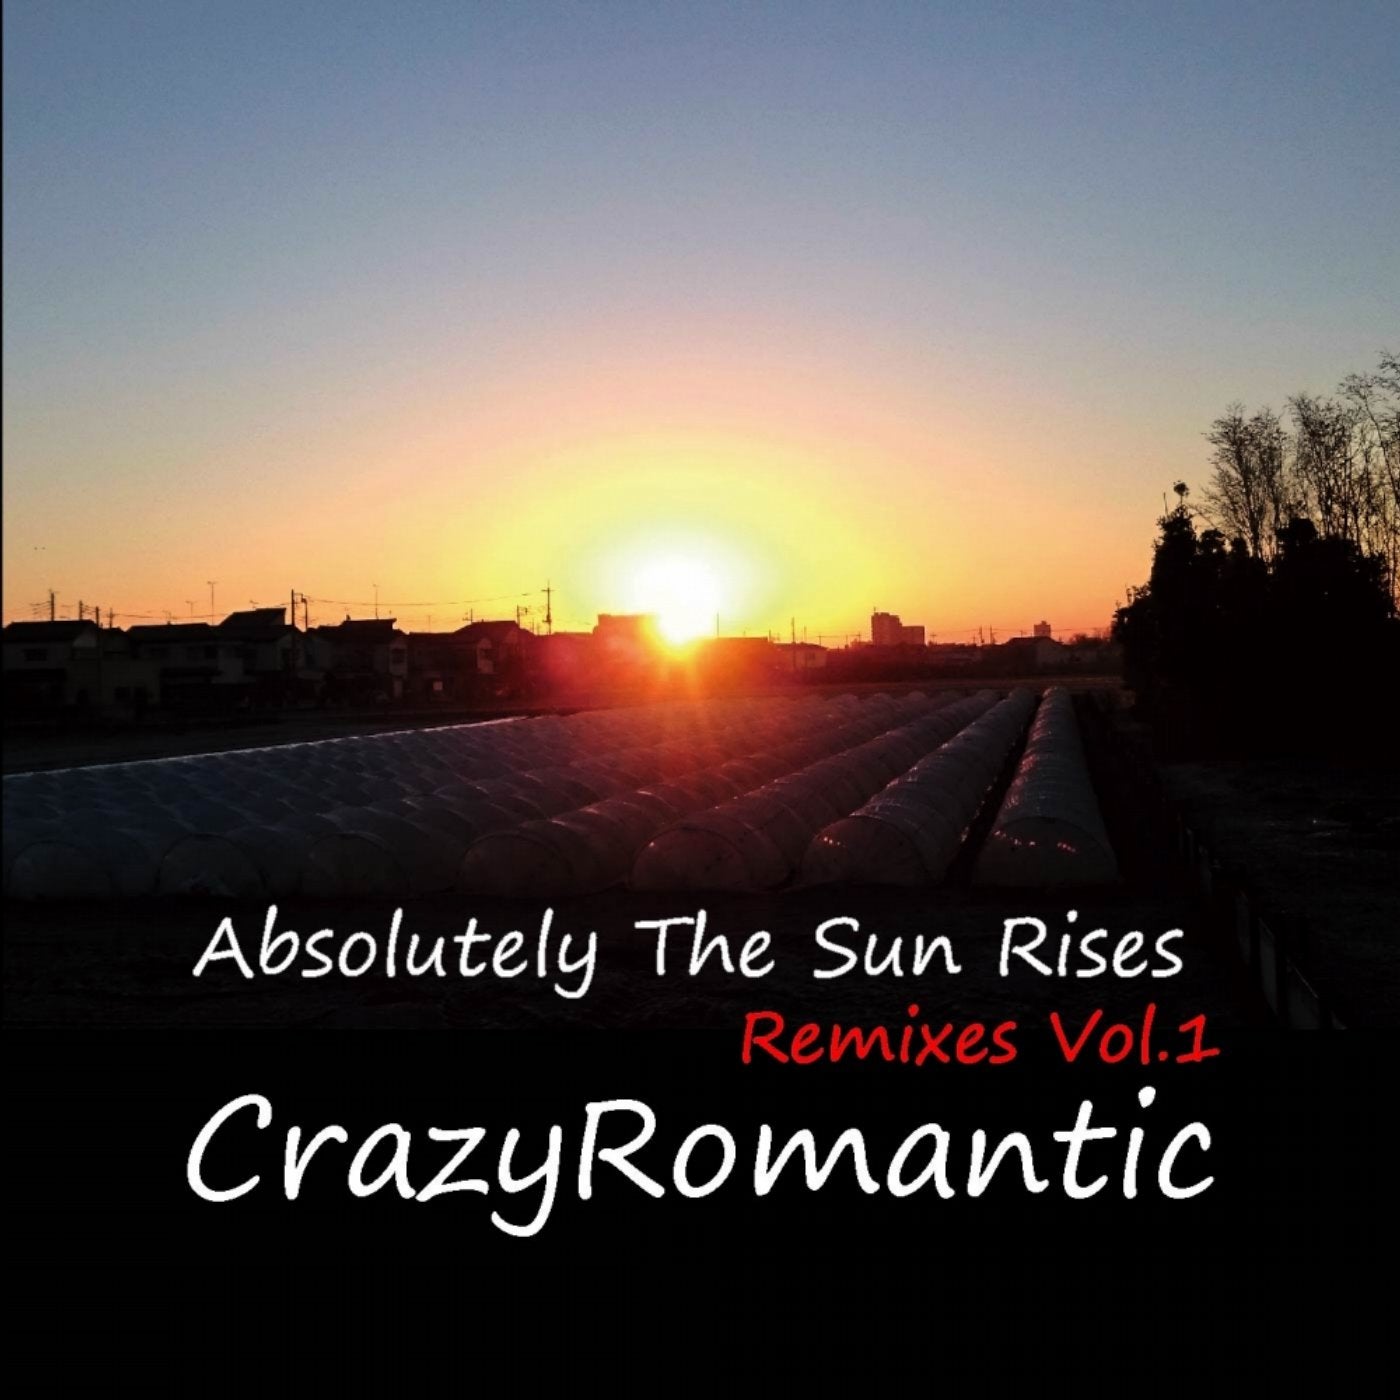 Absolutely The Sun Rises Remixes, Vol. 1